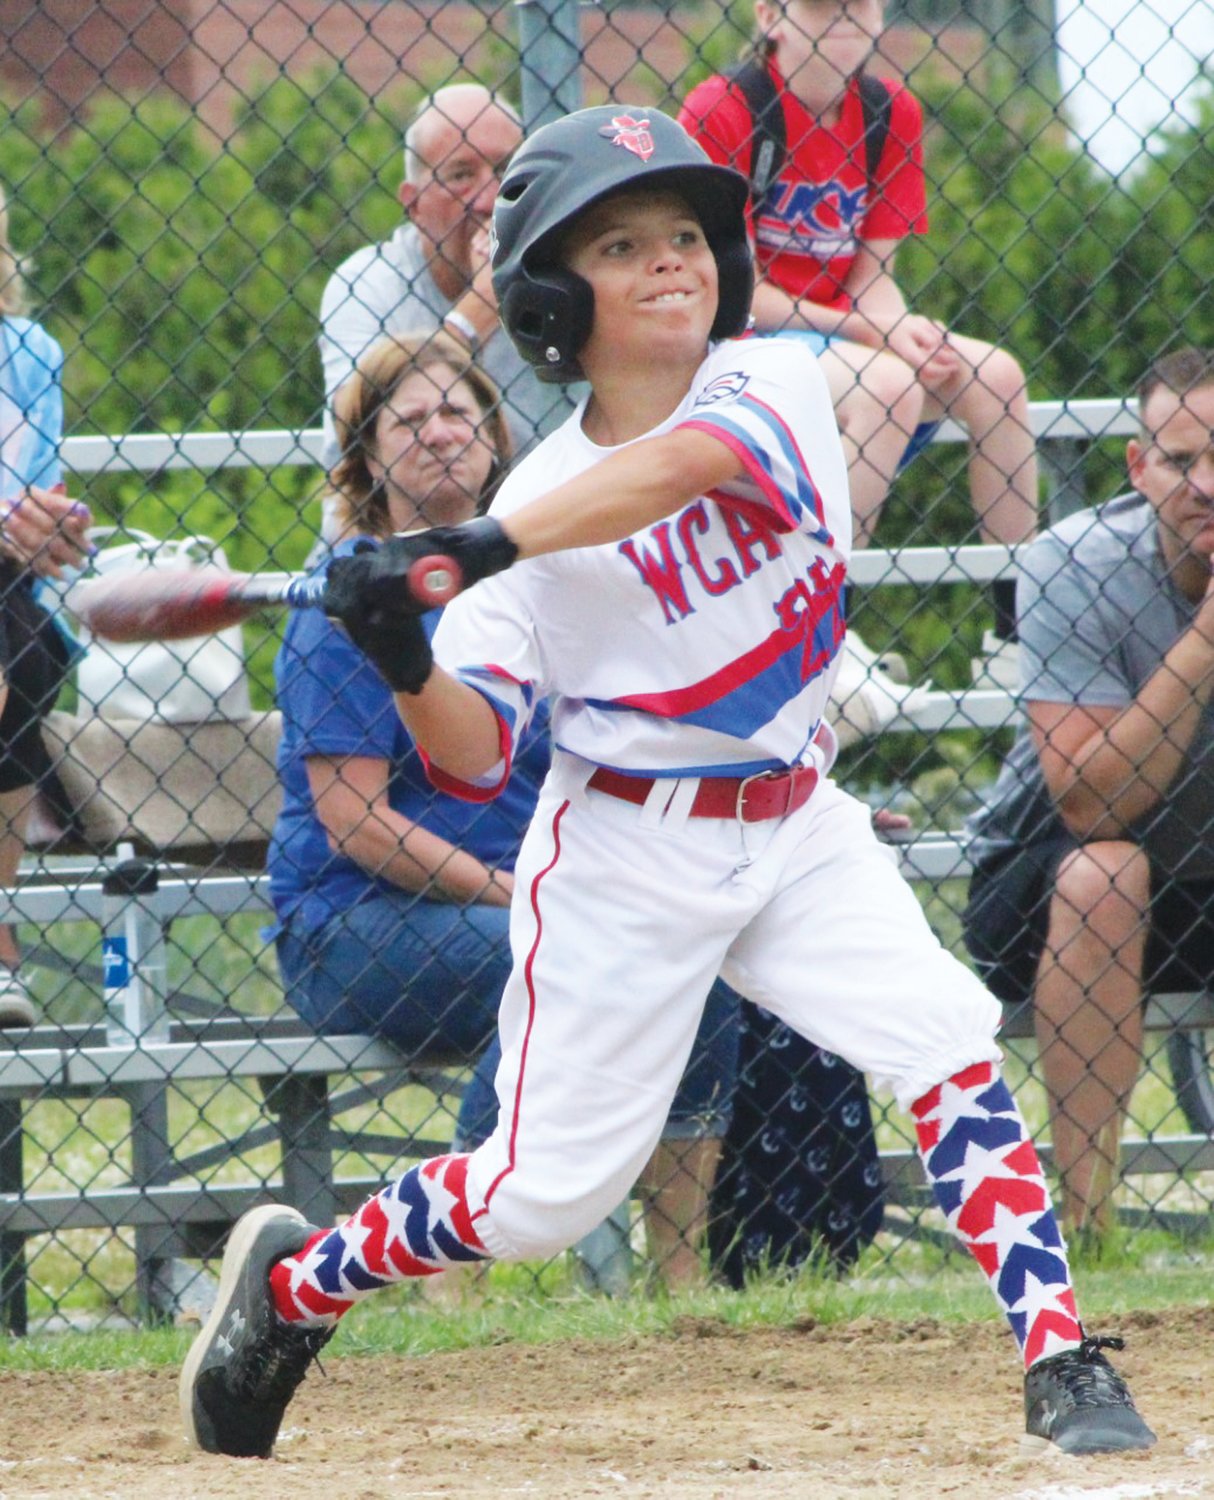 GETTING THE WIN: WCA’s Kevin Ventura takes a swing at the plate.